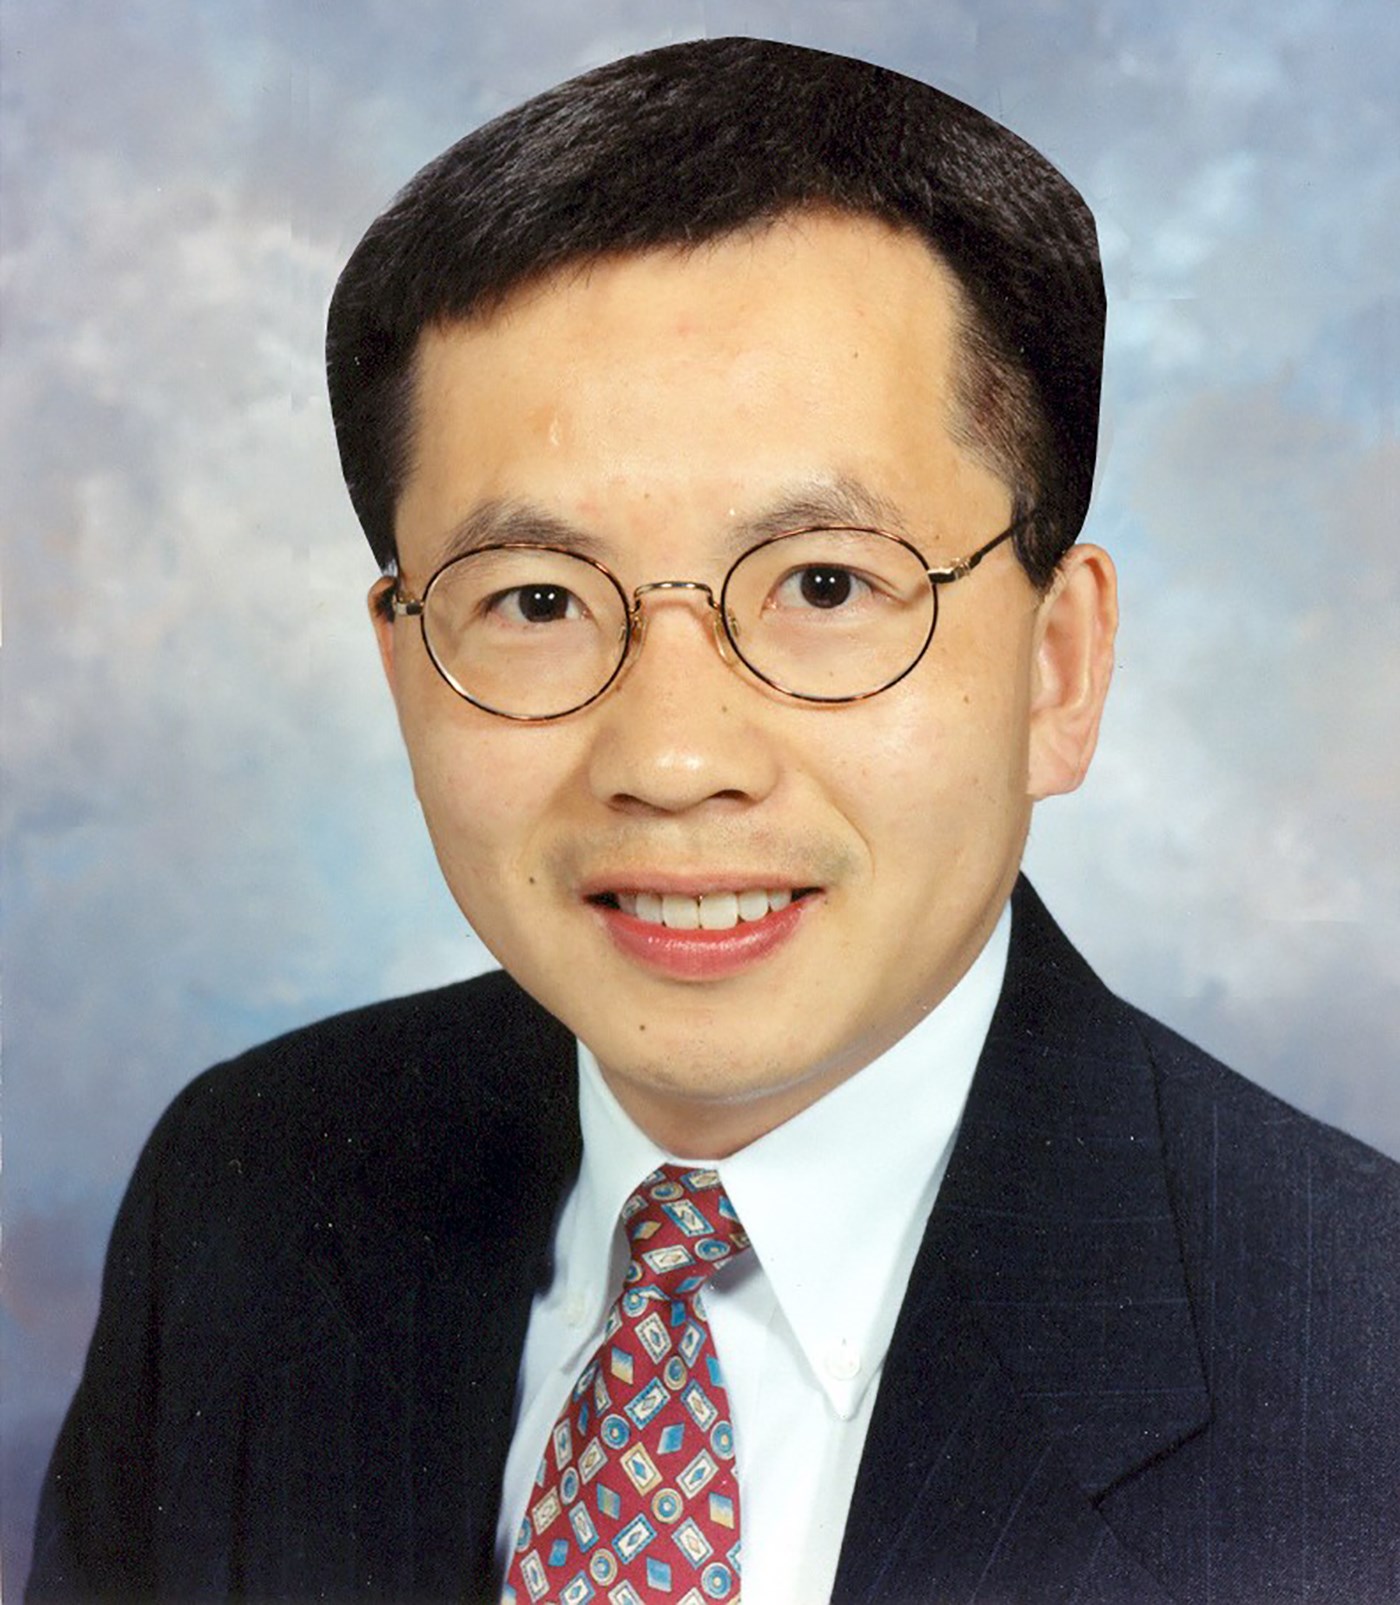 Hongwei (Harry) Zhu is the Operations and Information Systems Acting Department Chair, Professor at UMass Lowell.